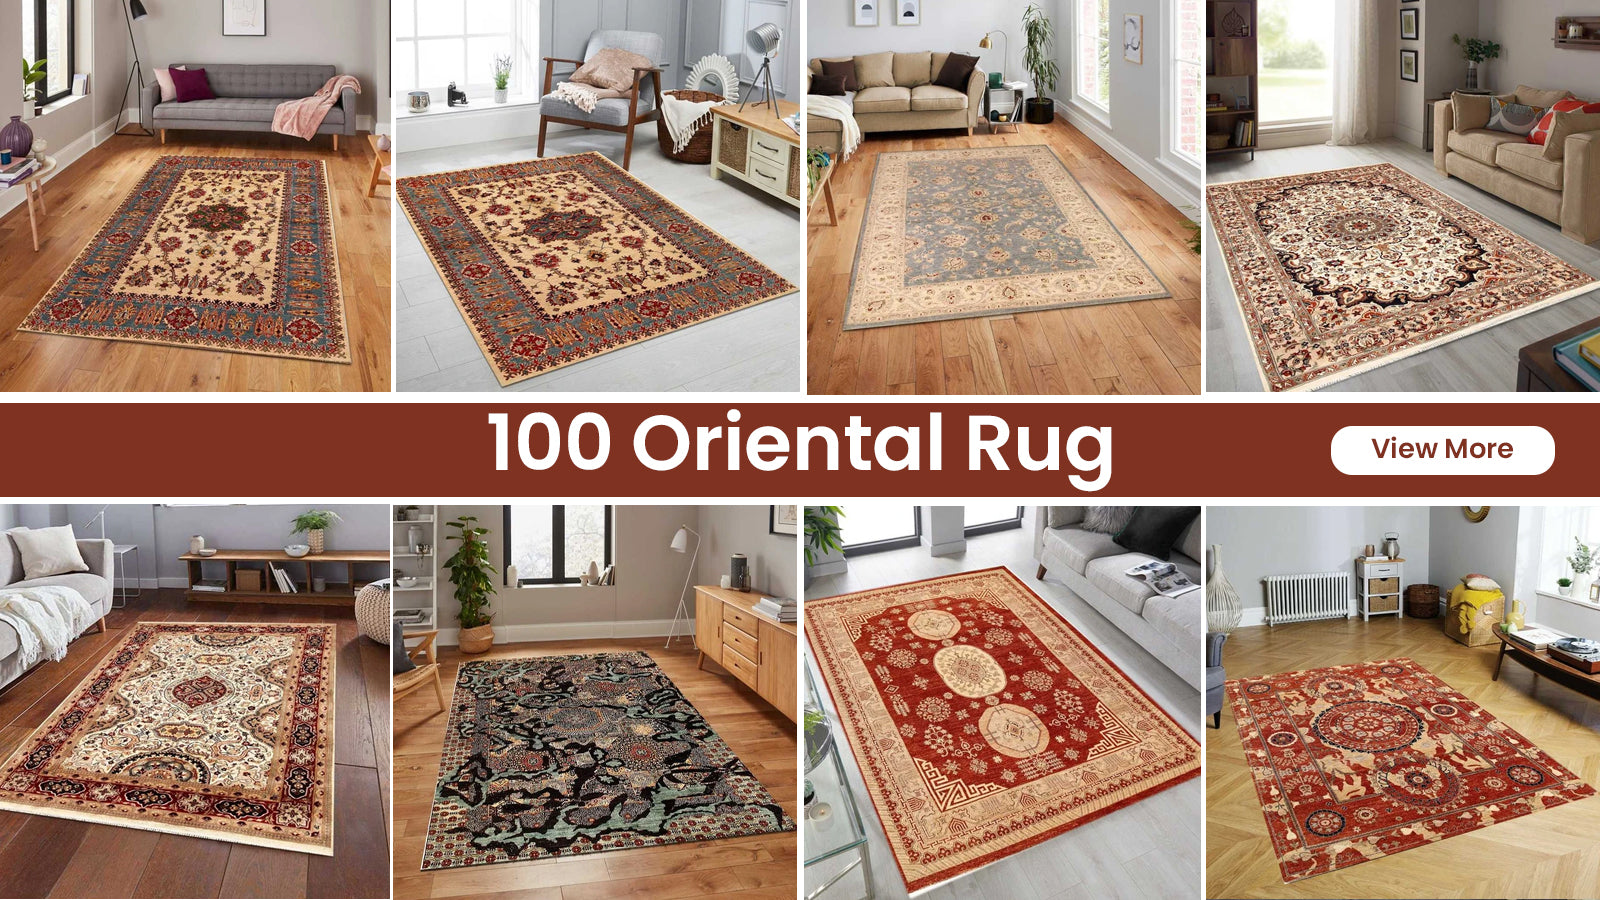 Source Keep Your Rug in Place Make Corner Flat and Easily Peel Off